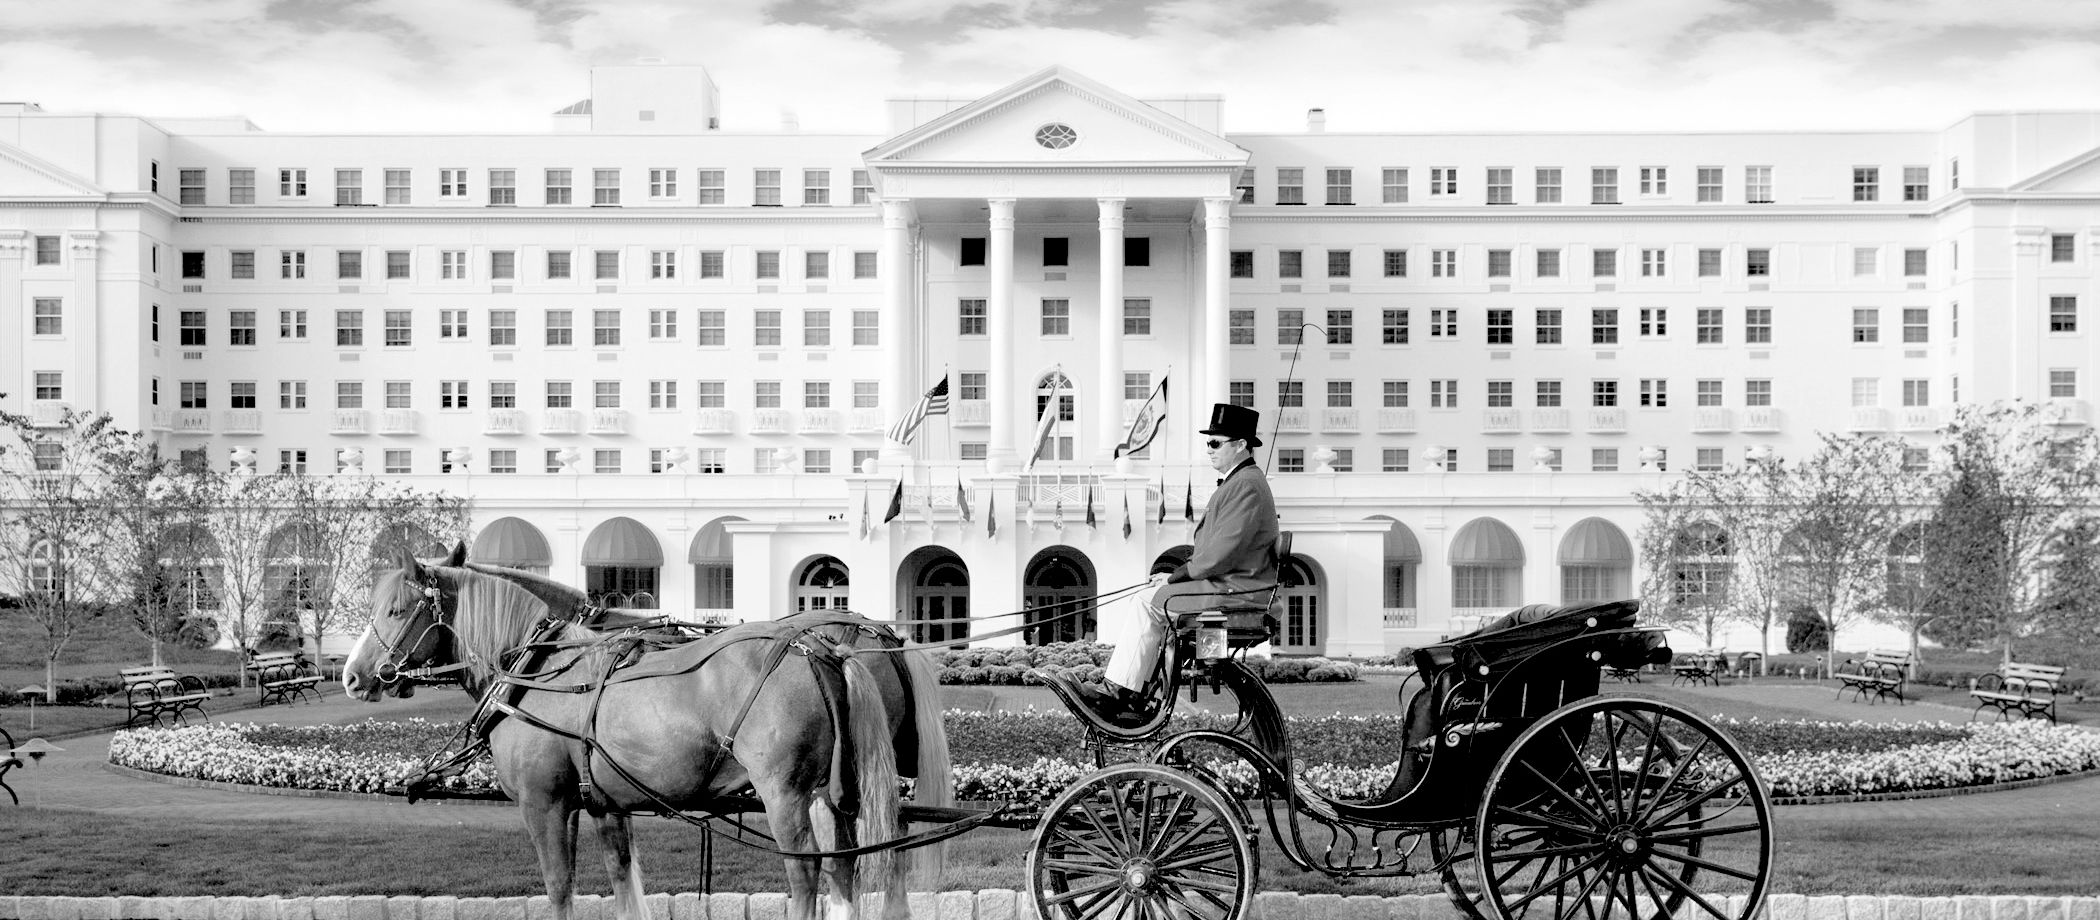 greenbrier-history-carriage